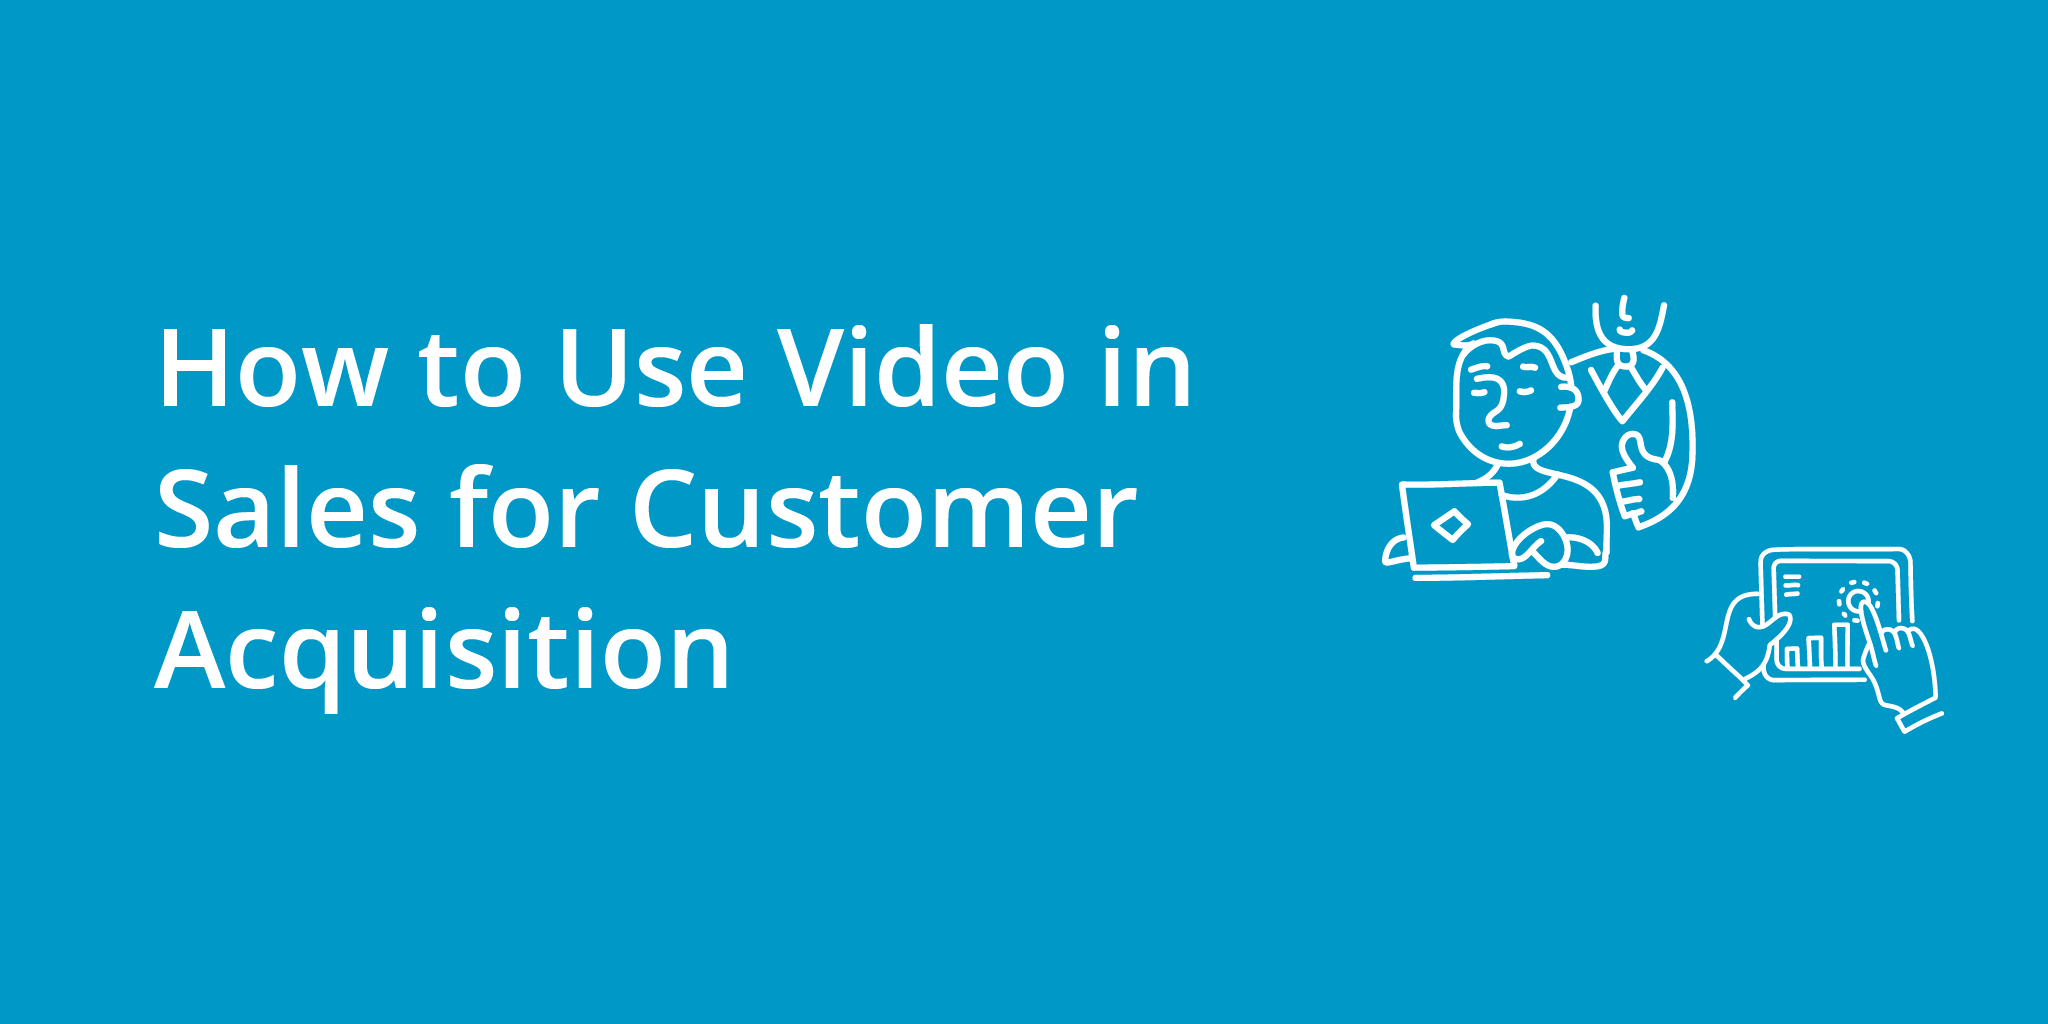 How to Use Video in Sales for Customer Acquisition | Telephones for business